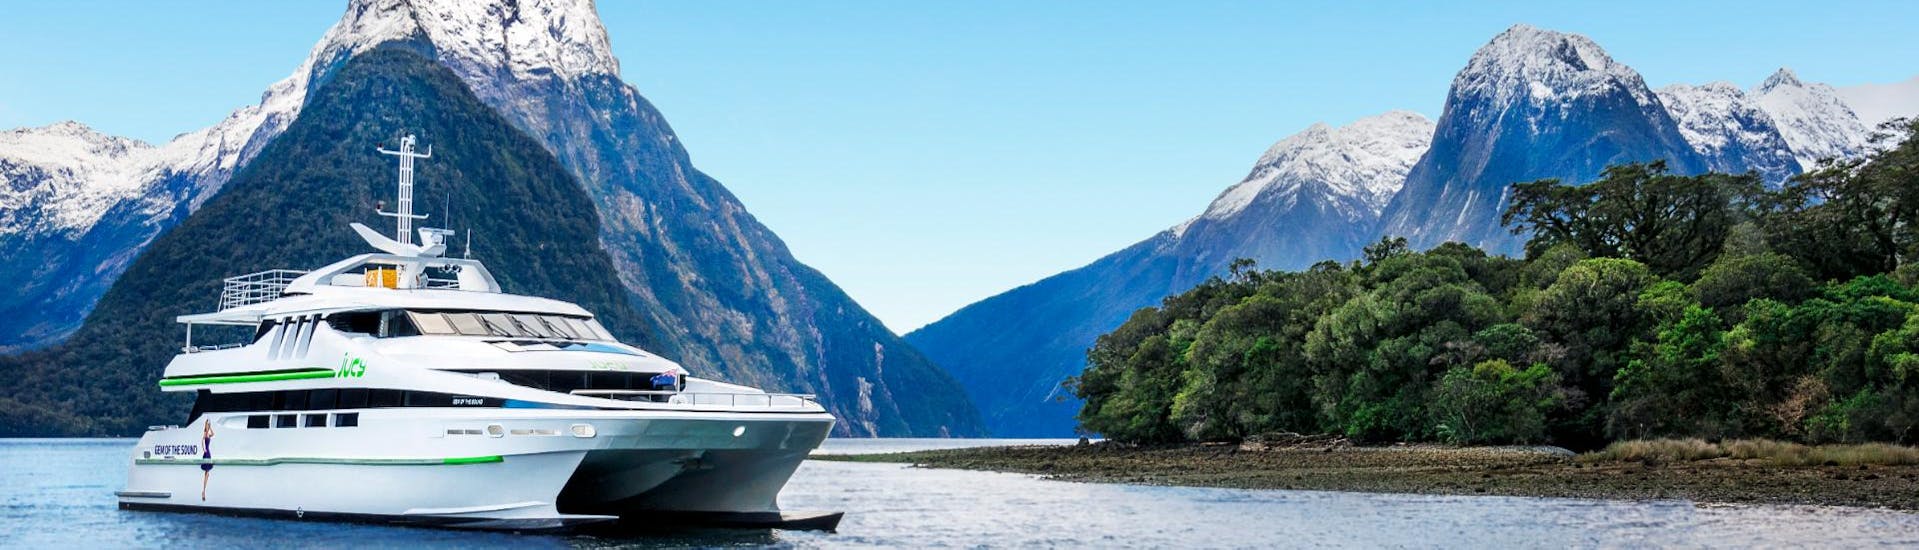 A luxurious catamaran from the company Jucy Cruise Milford Sound is heading to Milford Sound, the 8th wonder of the world.